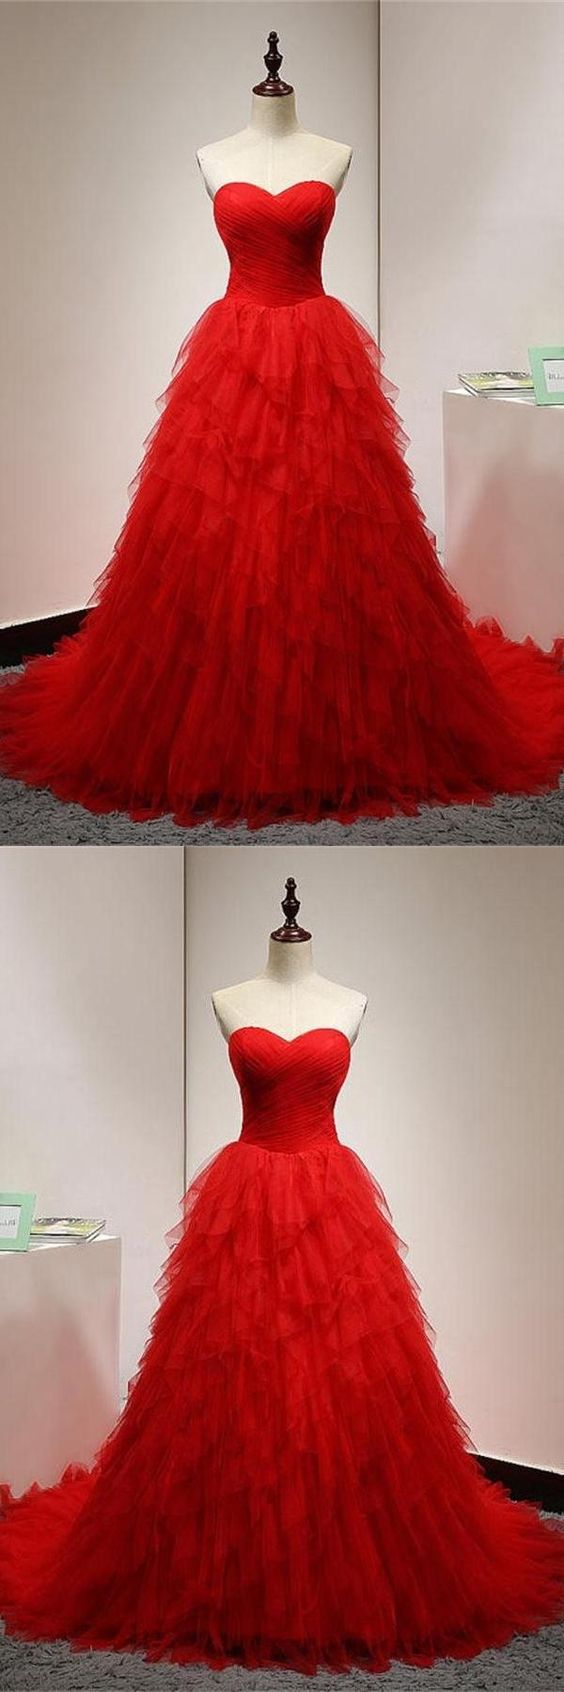 Vintage Red Ruffle Long Prom Dresses A Line , 16 Sweet Prom Dress ,off Shoulder Prom Gowns ,